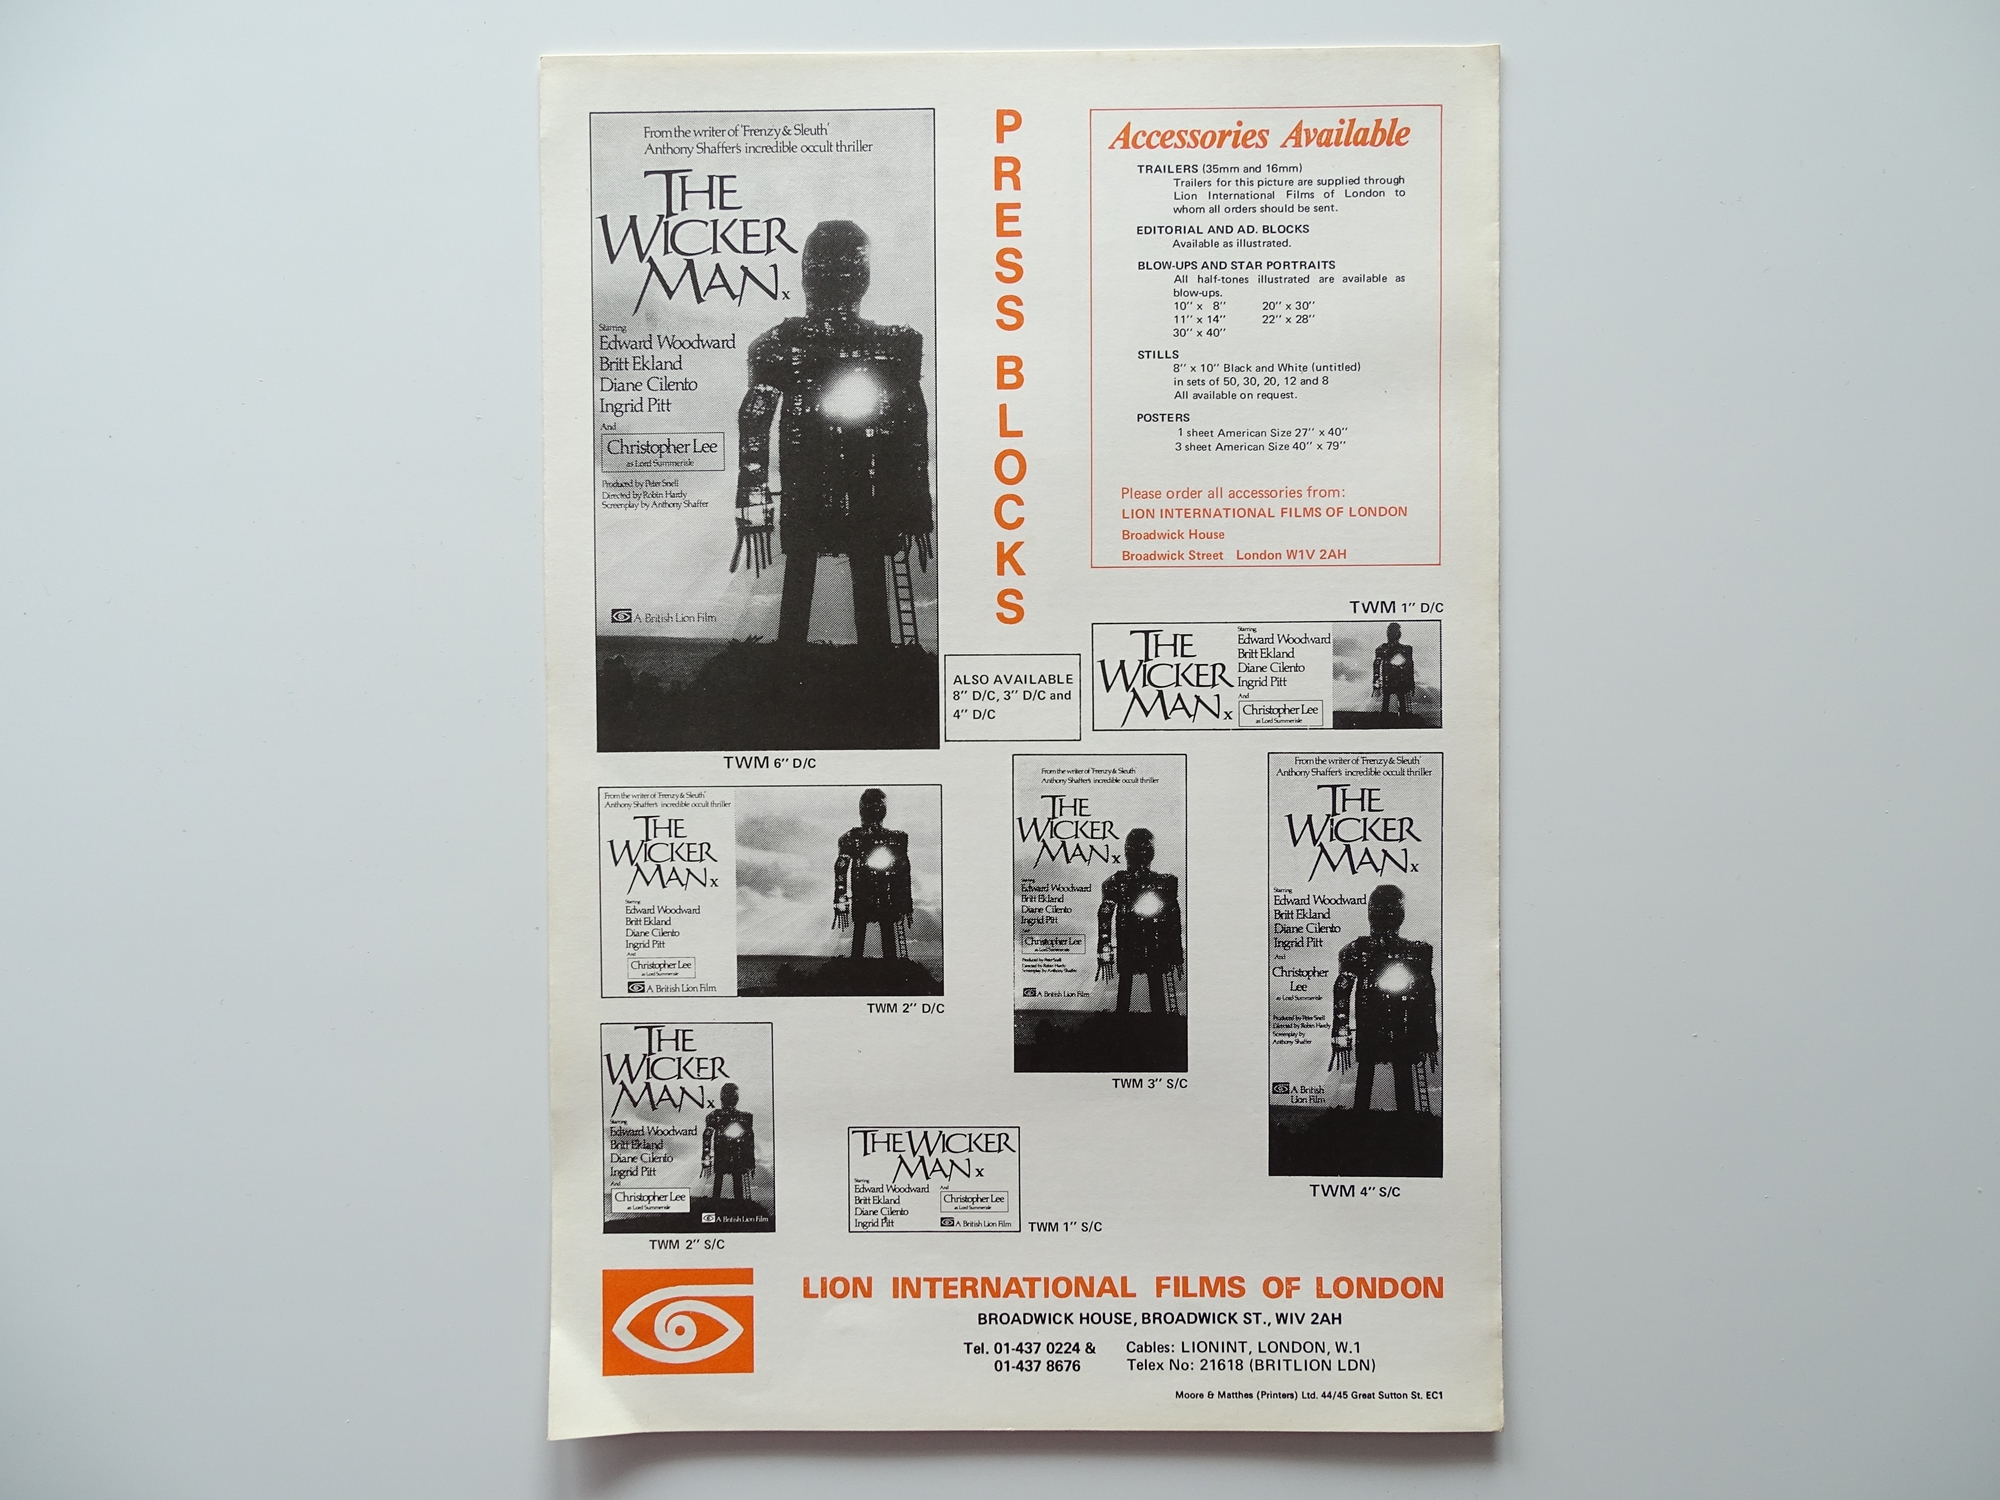 THE WICKER MAN (1973) - BRITISH PRESS CAMPAIGN BROCHURE - Flat/Unfolded (as issued) Fine - Image 2 of 2